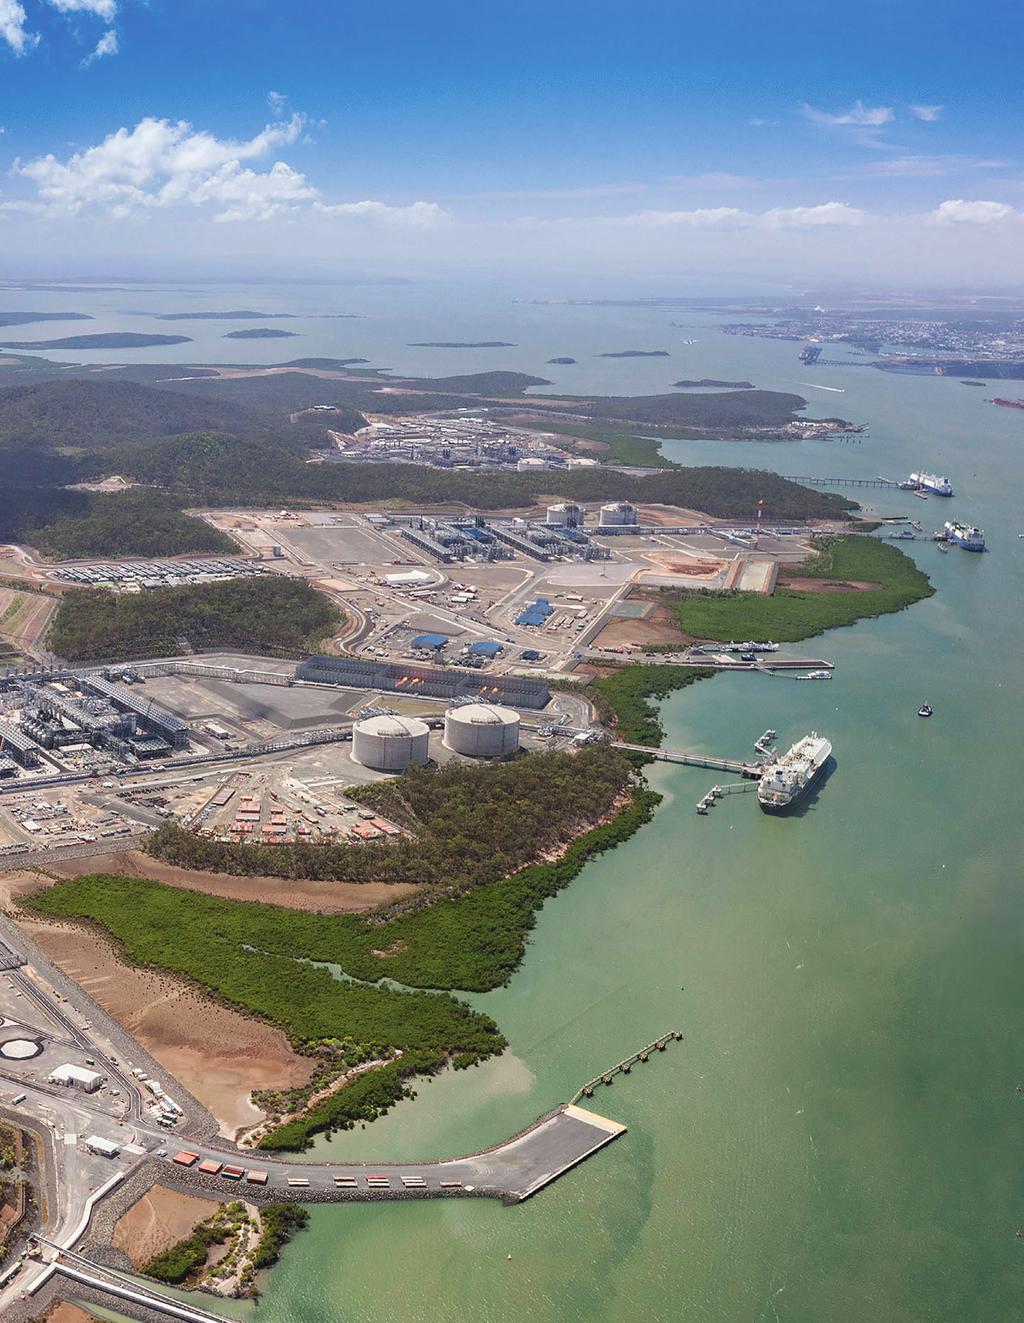 23 46 20 S 151 11 38 Curtis Island LNG Projects Queensland, Australia INFRASTRUCTURE